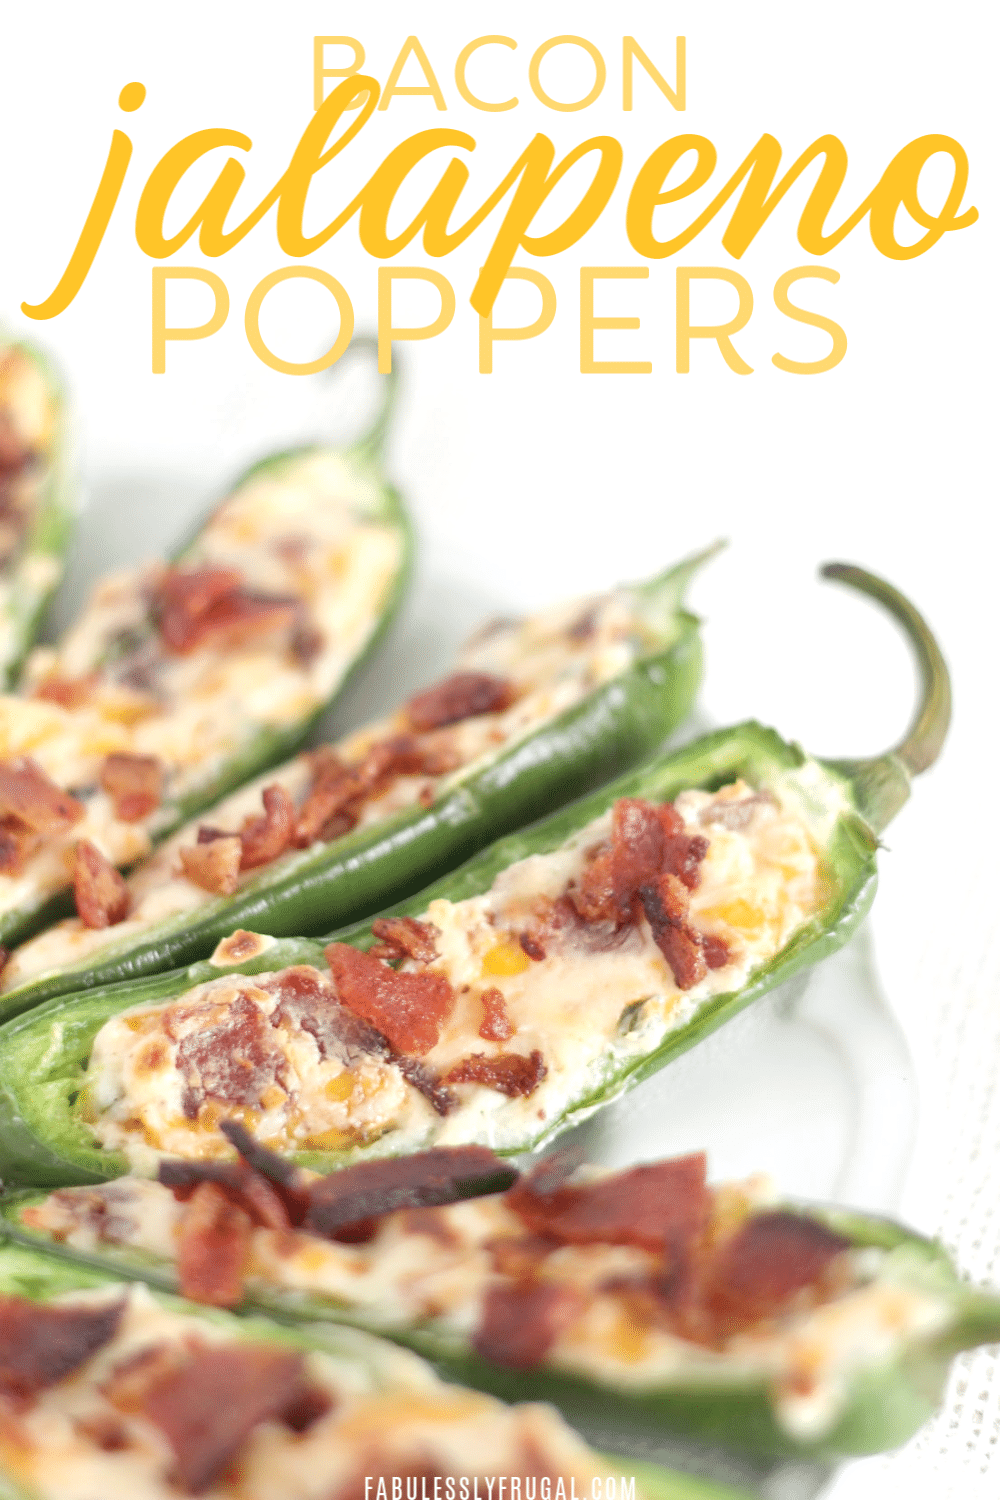 Bacon jalapeno poppers